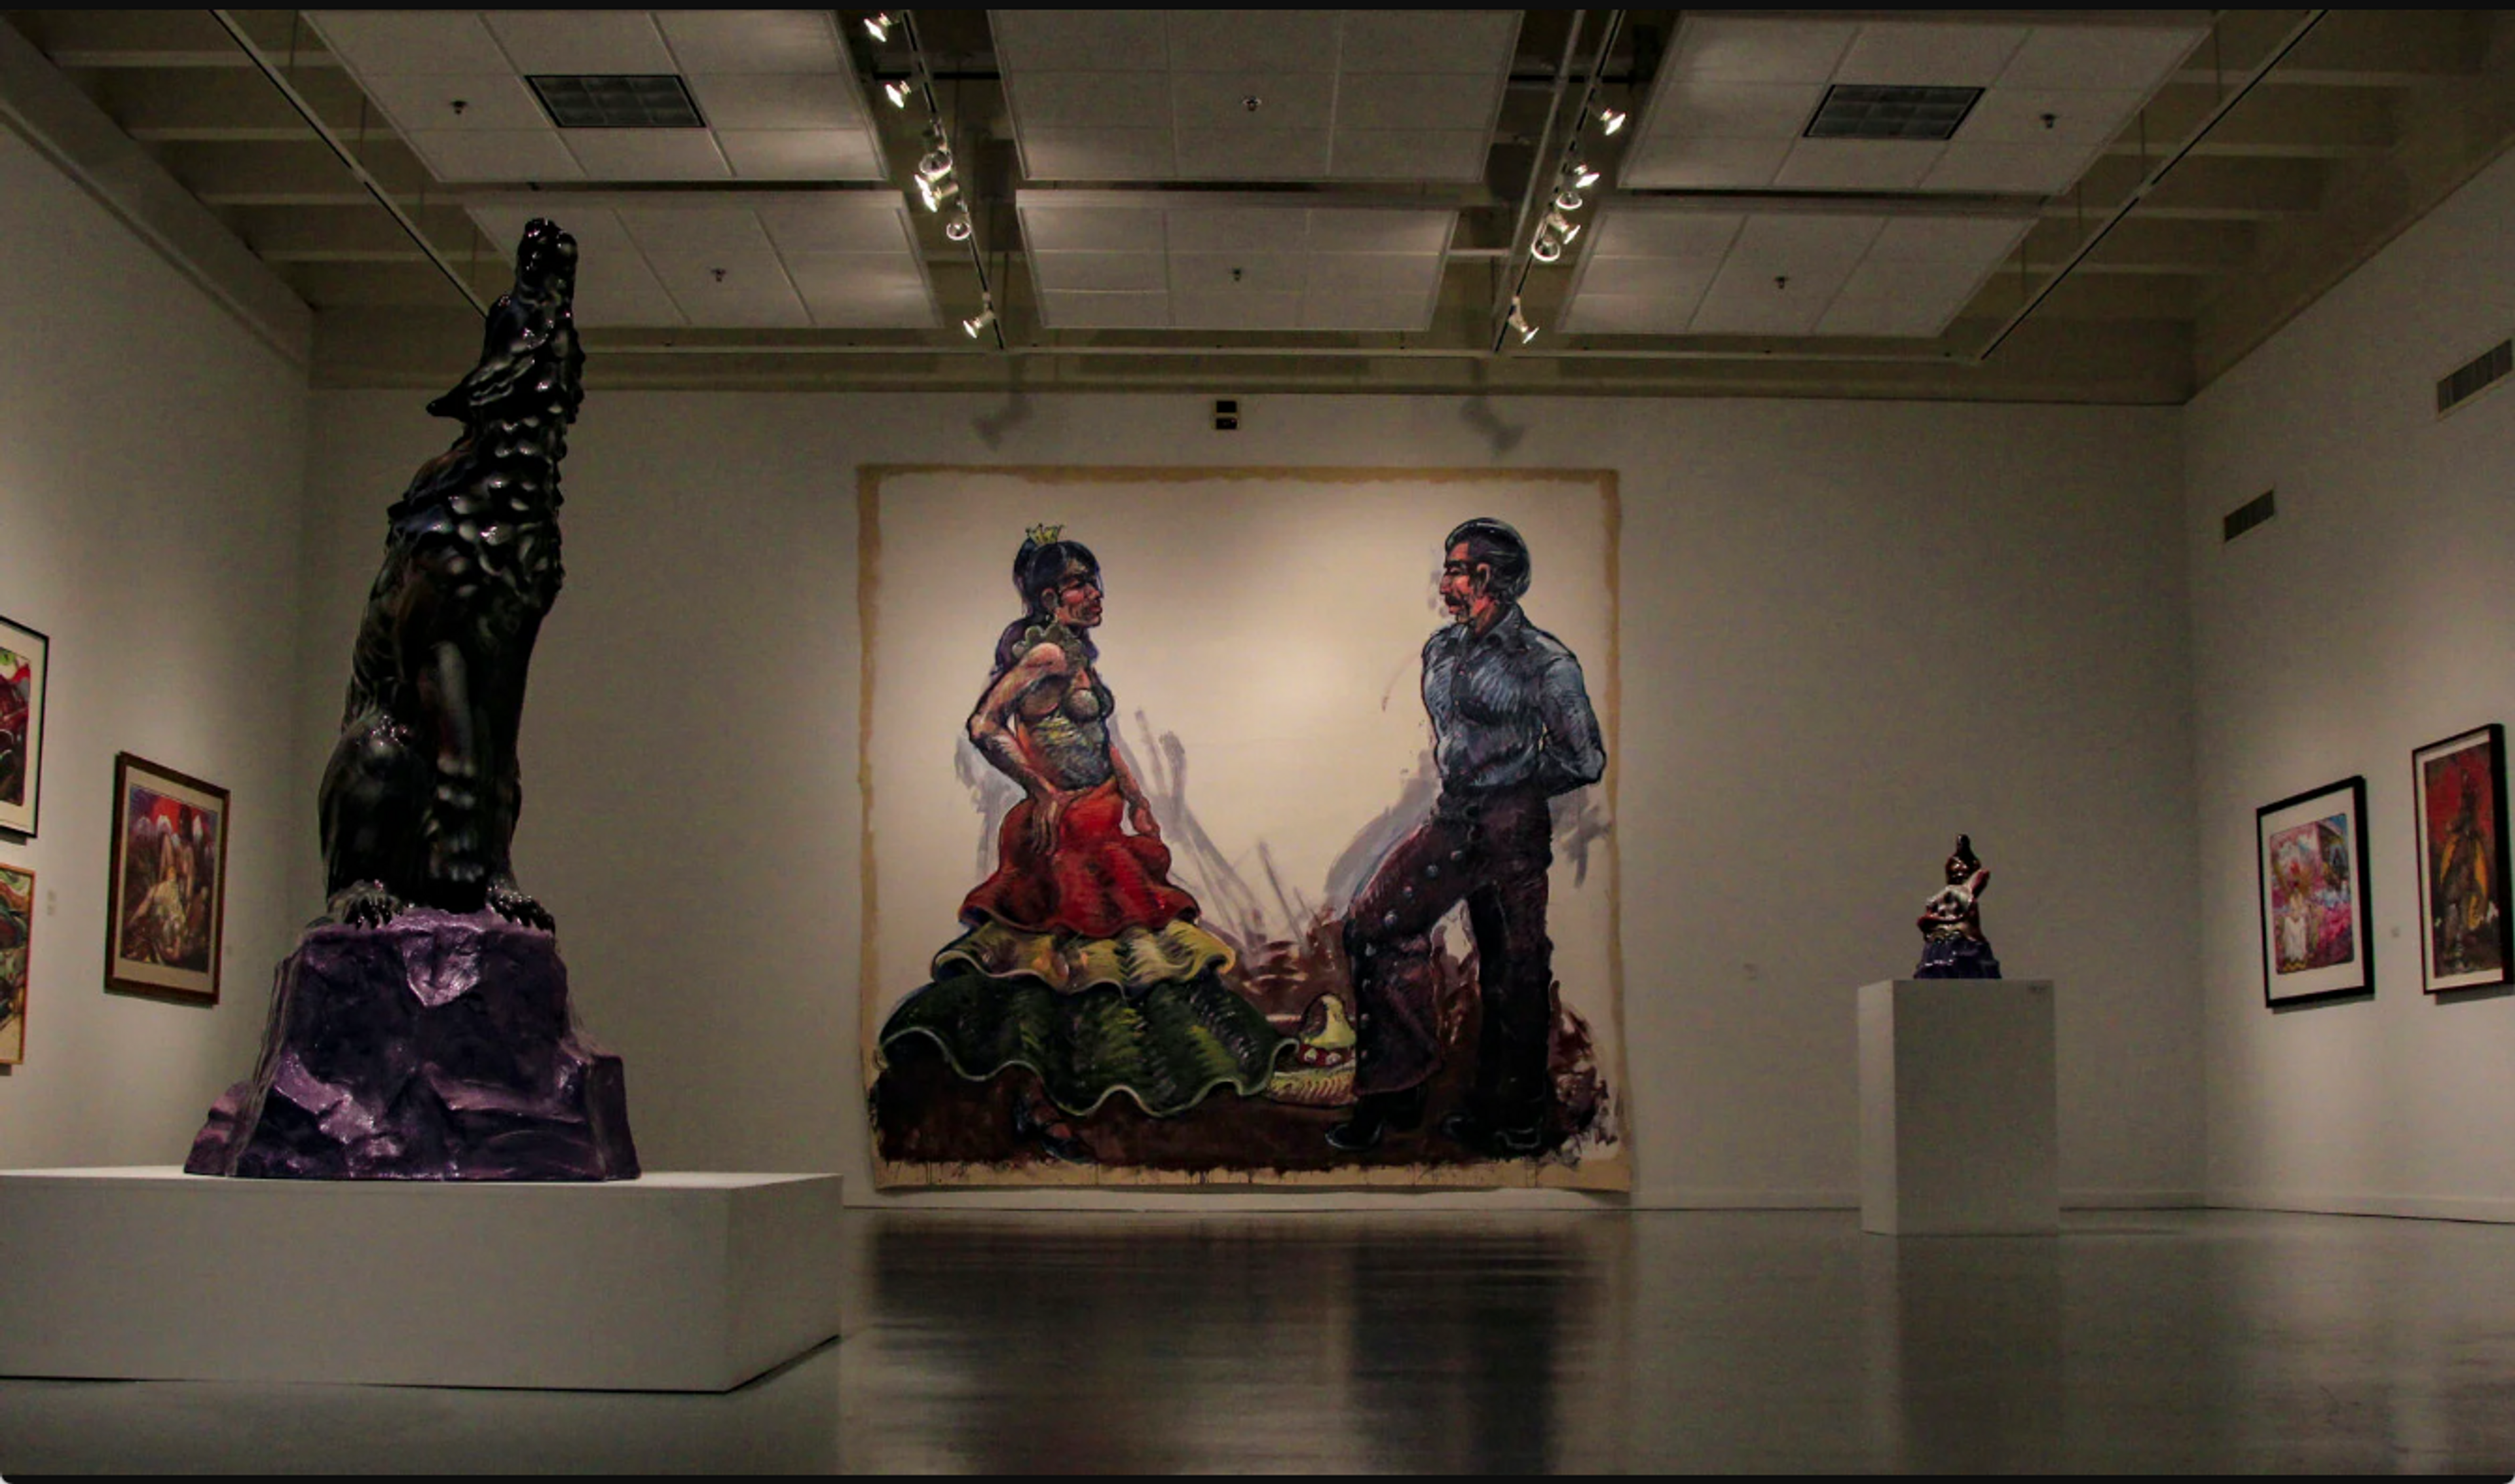 Sculptures, paintings and sketches sit on display at the “Life and Death: Luis Jiménez” gallery Jan. 23 at The Gallery at UTA. The art was co-curated by Benito Huerta and Christina Rees.